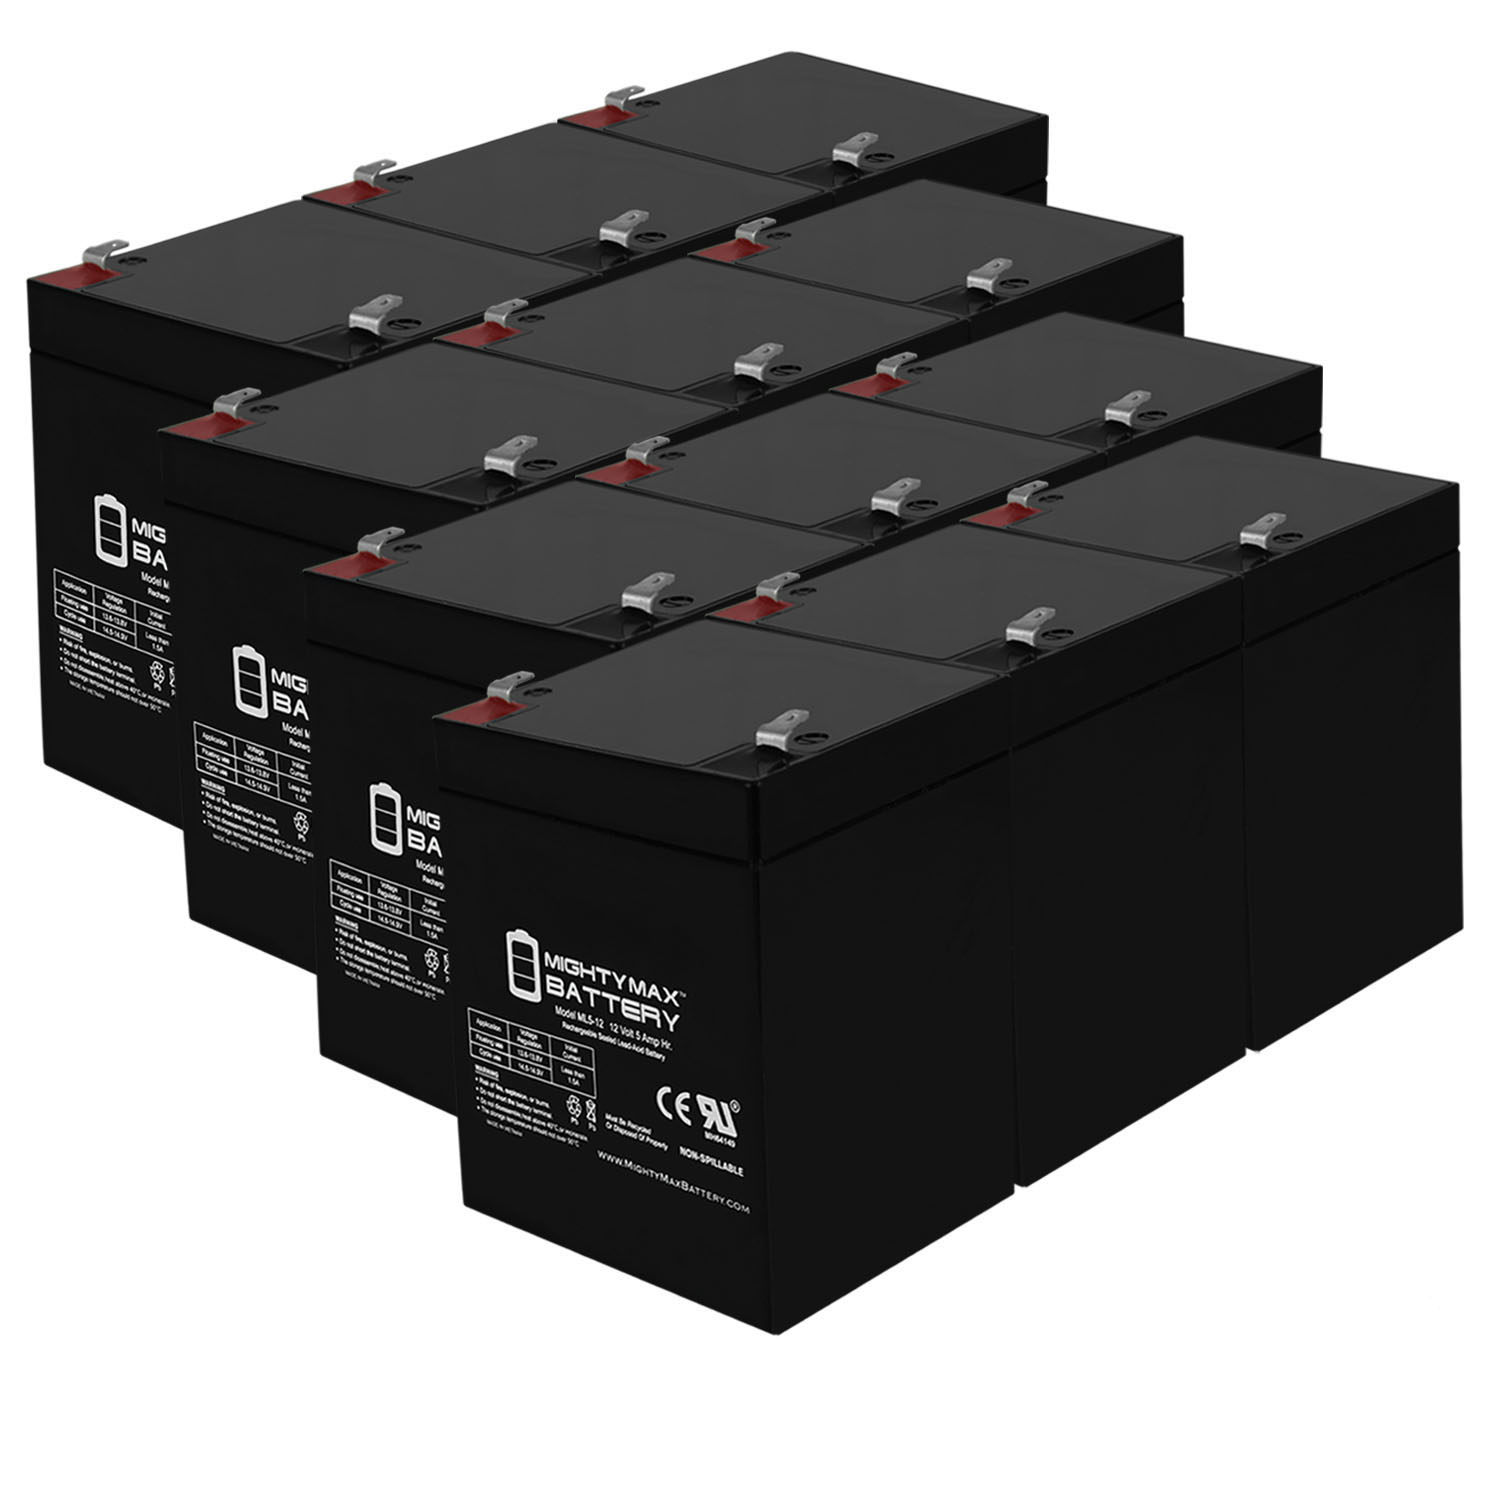 ML5-12 - 12V 5AH SLA Replacement Battery for APC UPS Computer Back Up Power - 12 Pack